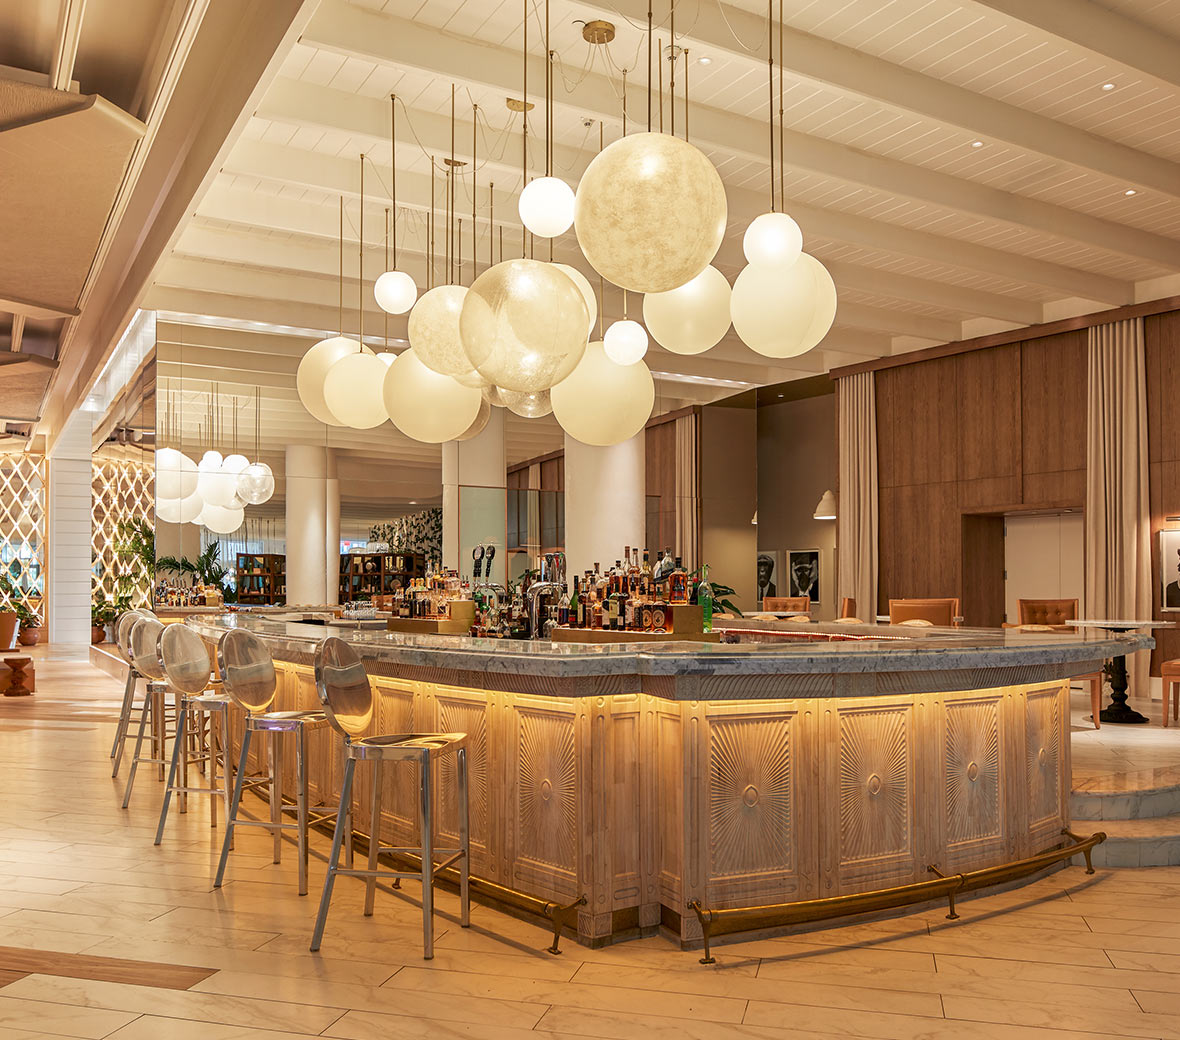 A spacious bar adorned with numerous hanging lights illuminating the area.